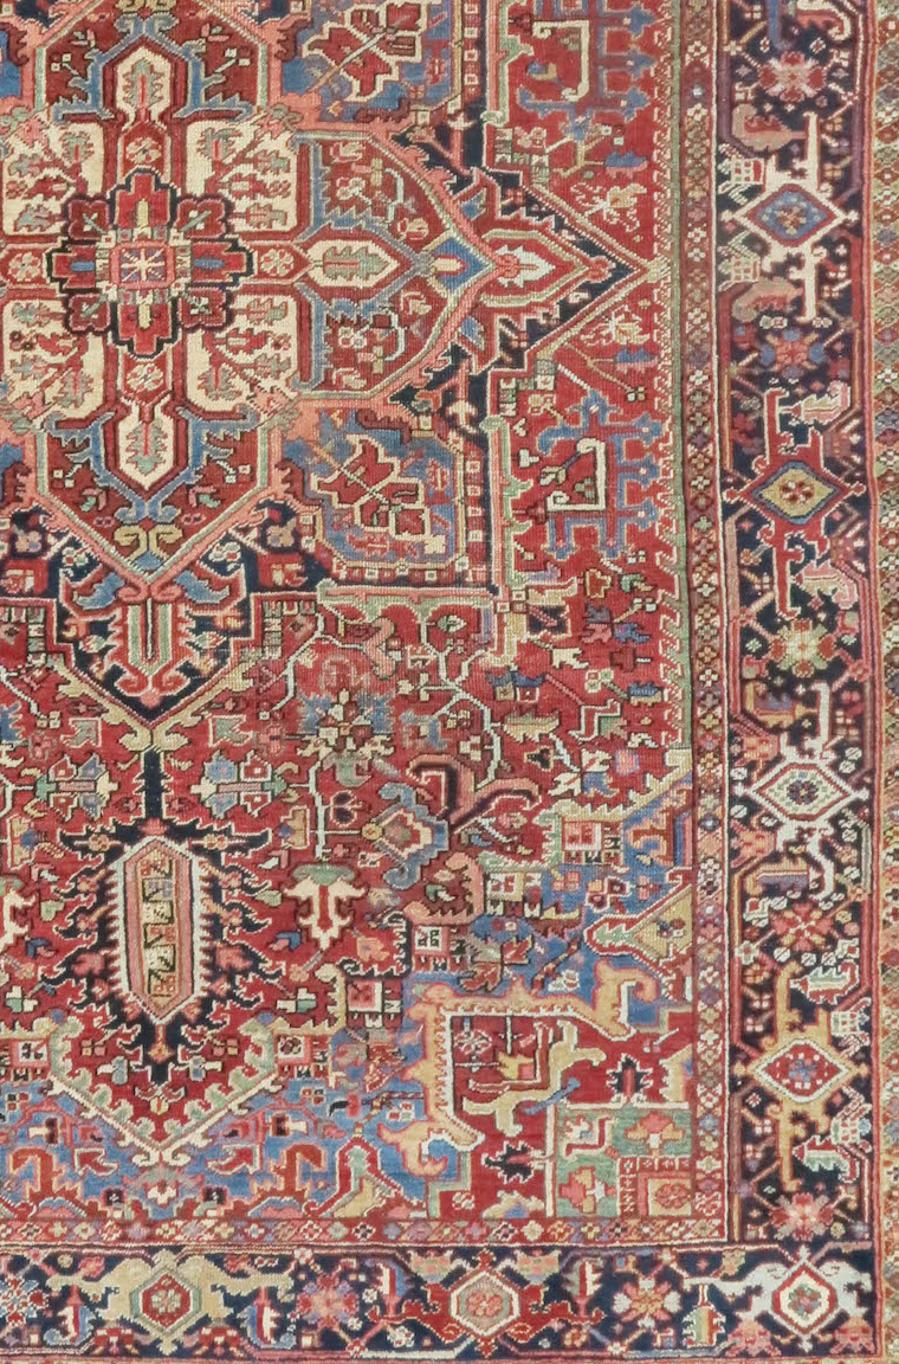 Persian Heriz rug from the early 20th century. Measures 7'7